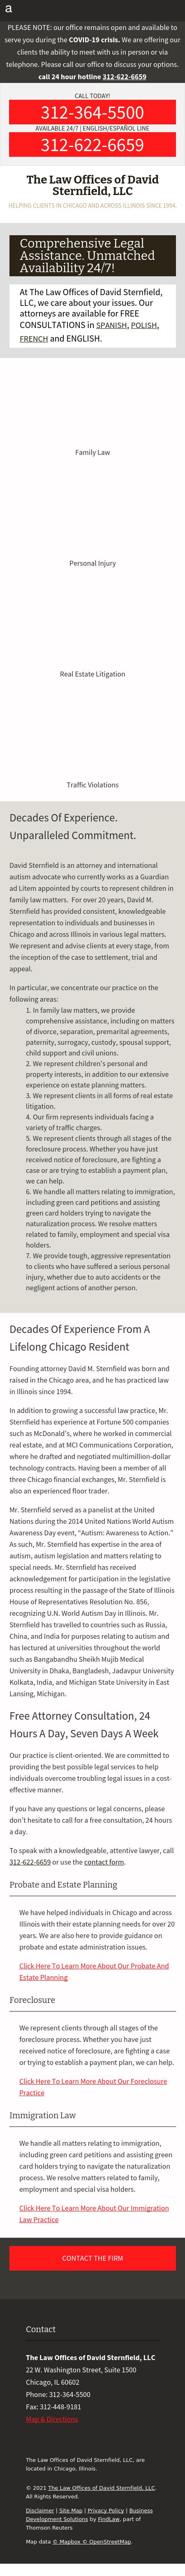 Law Offices of David M. Sternfield - Chicago IL Lawyers